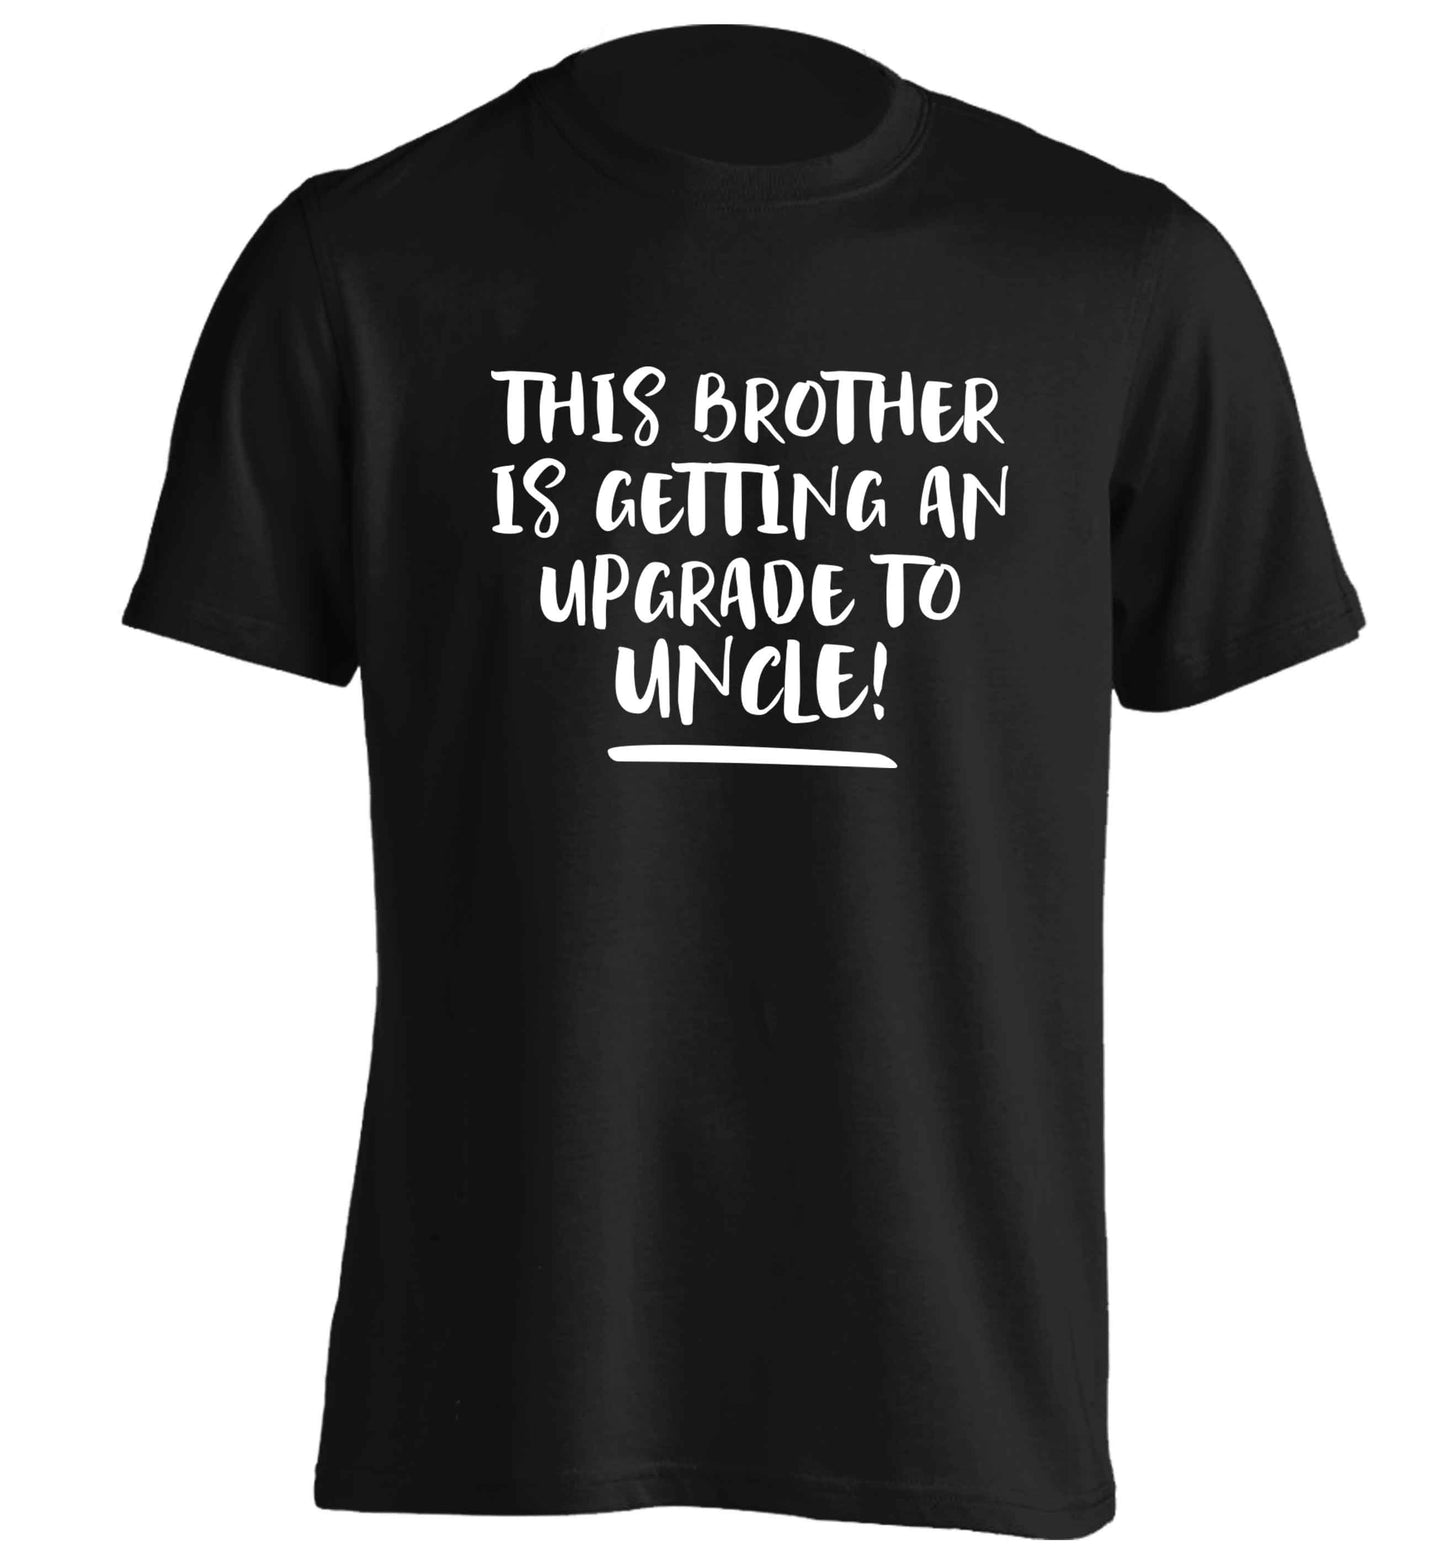 This brother is getting an upgrade to uncle! adults unisex black Tshirt 2XL